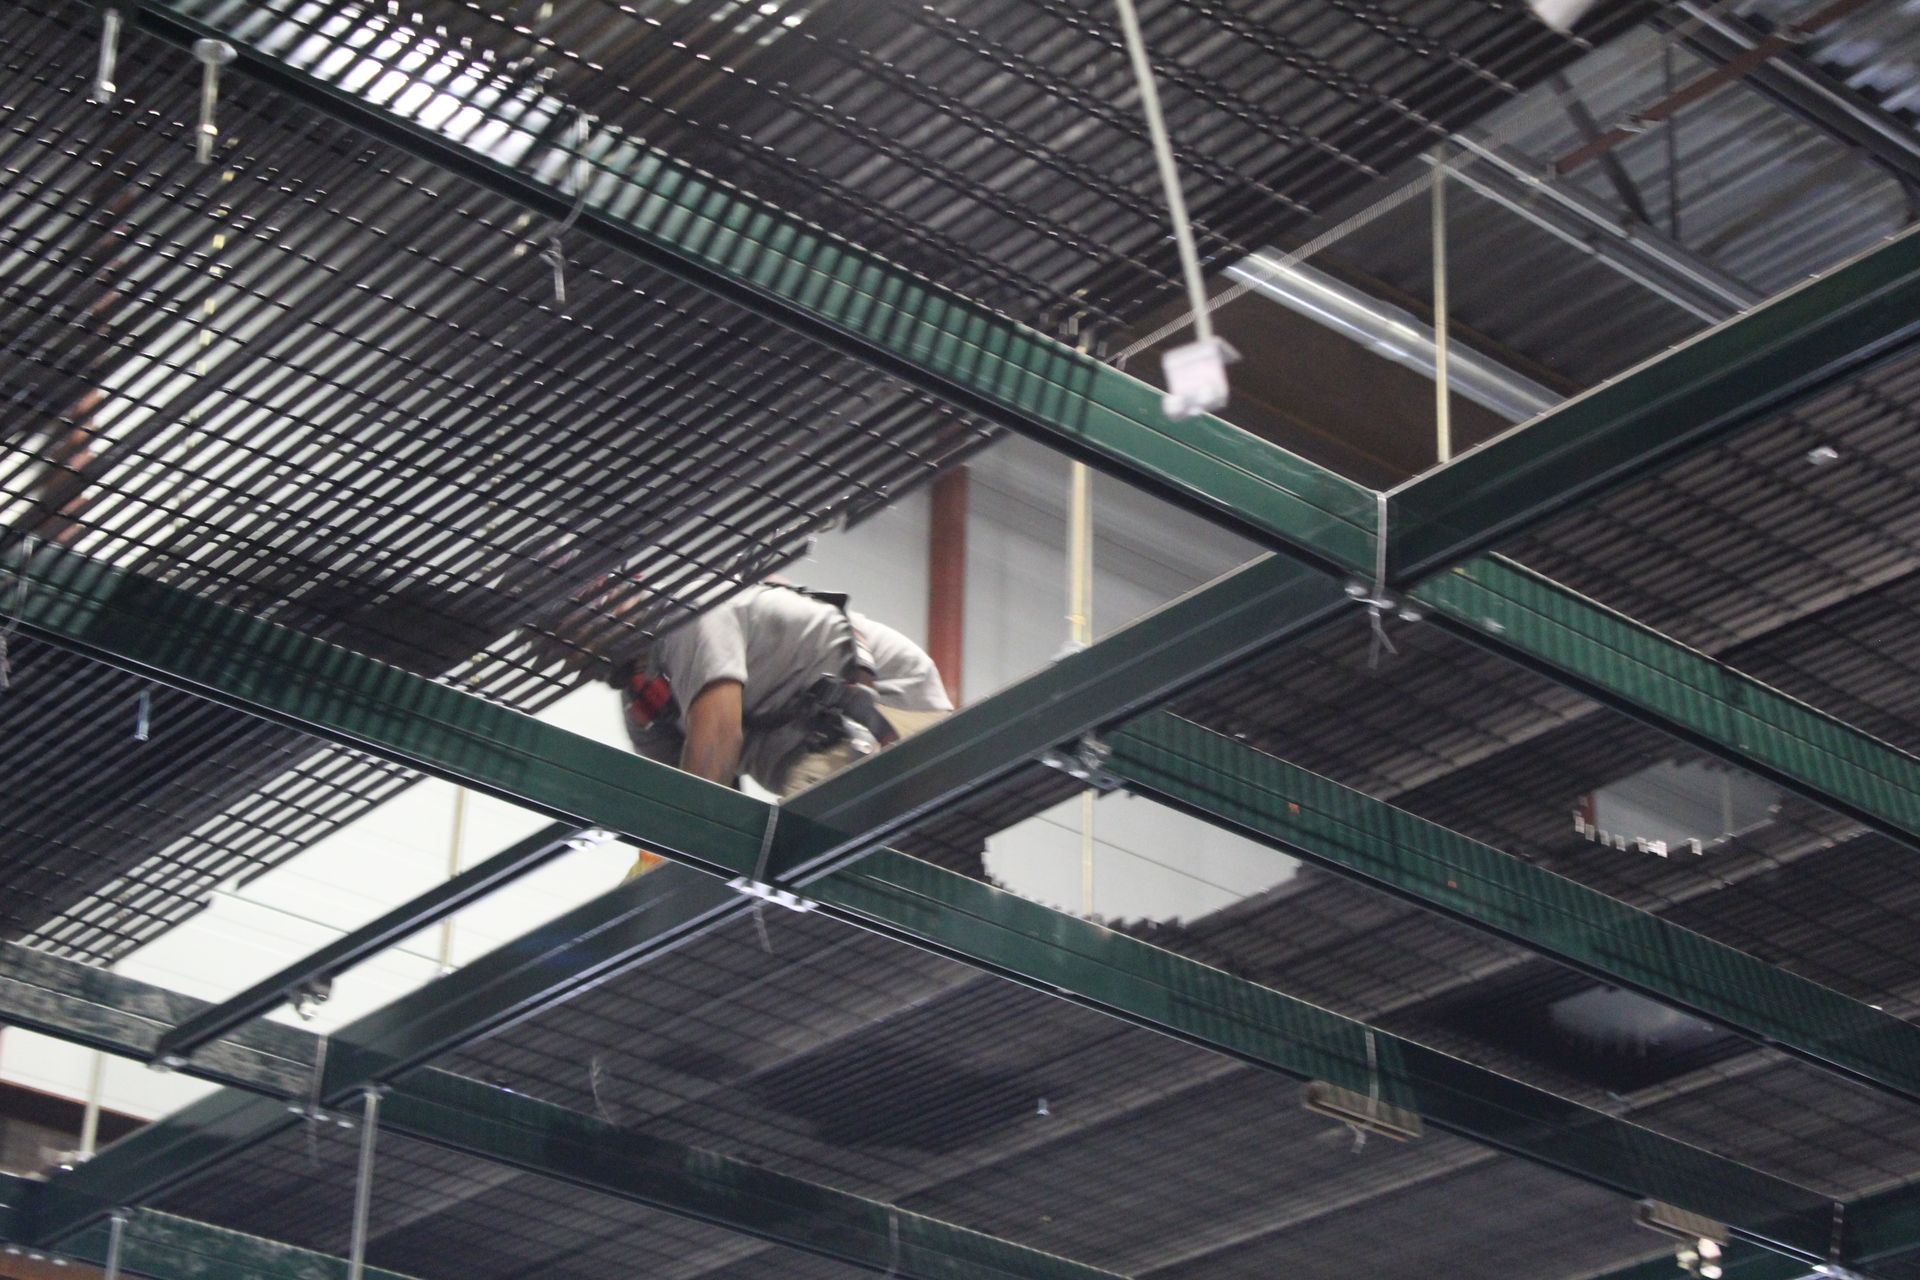 A man is working on the ceiling of a building